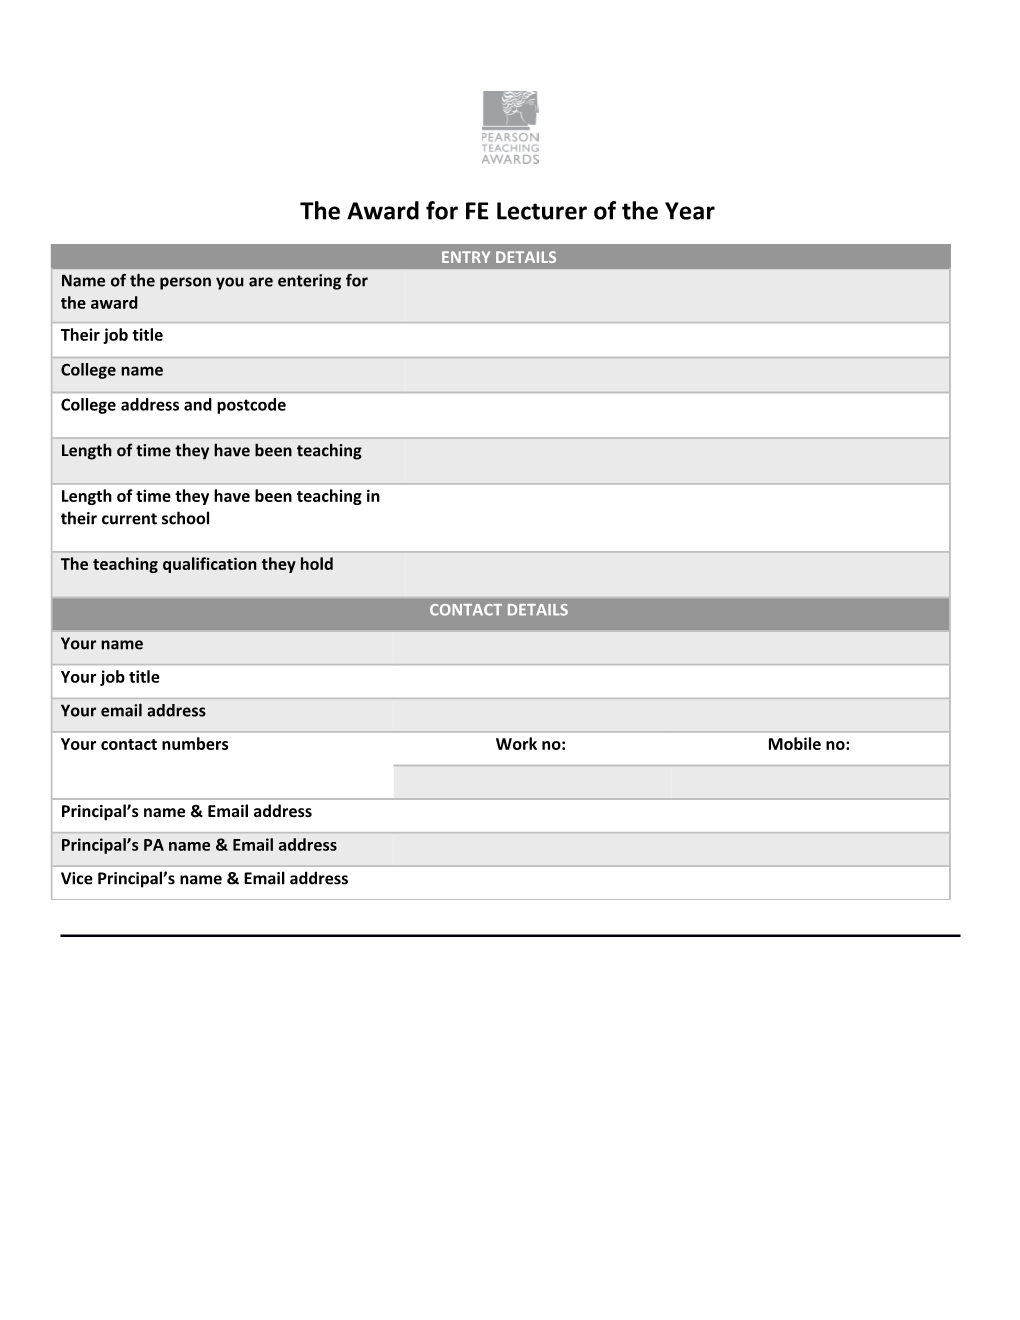 The Award for FE Lecturer of the Year